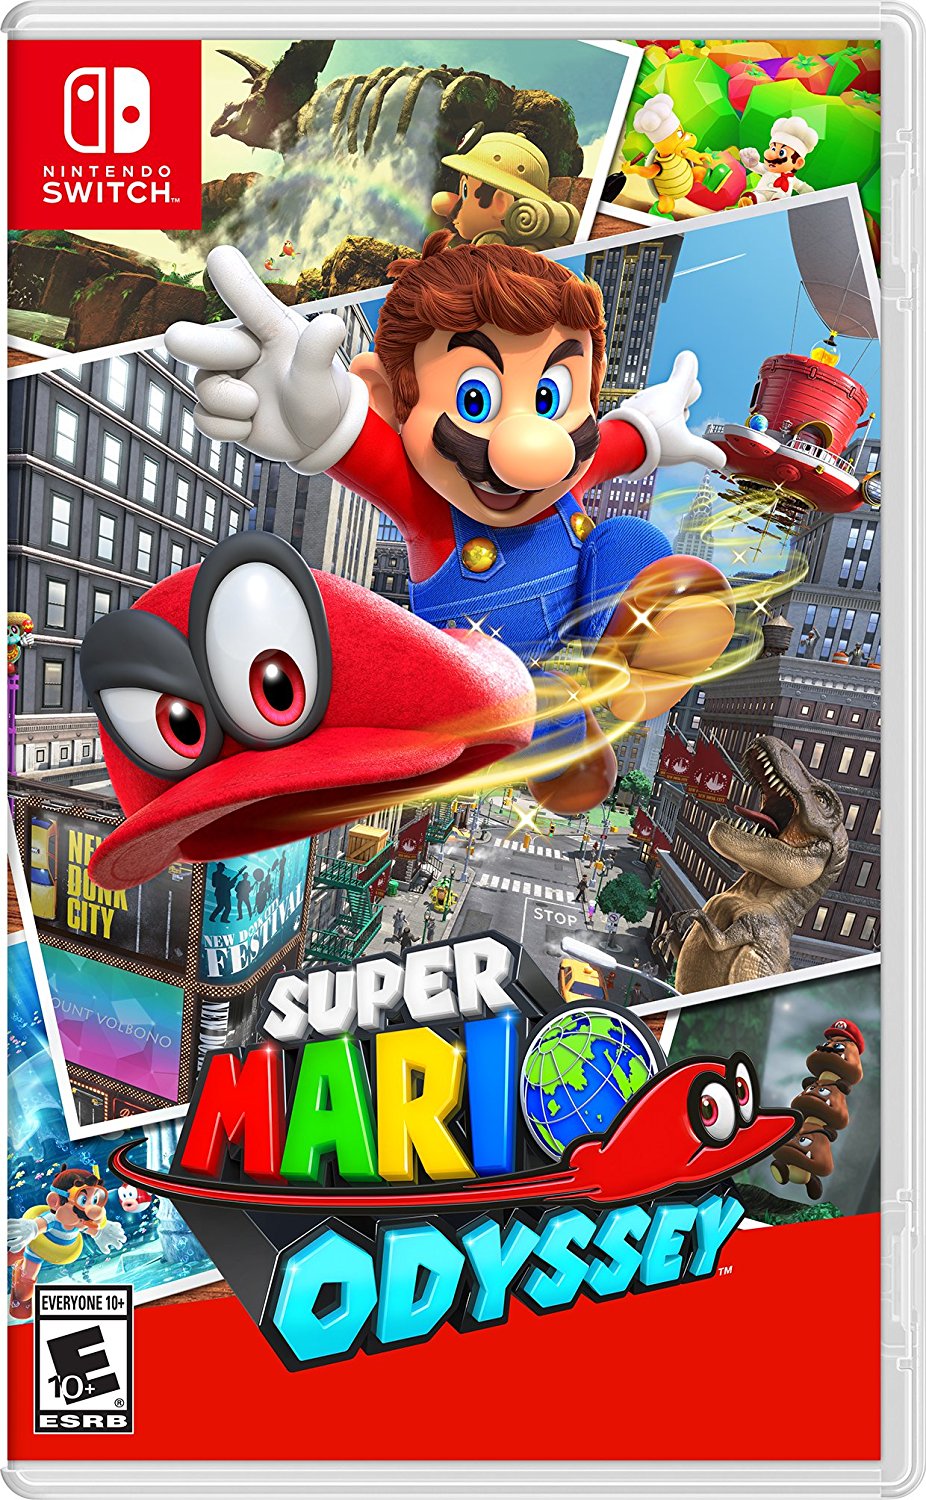 Super Mario Odyssey — the video game walkthrough and strategy guide wiki